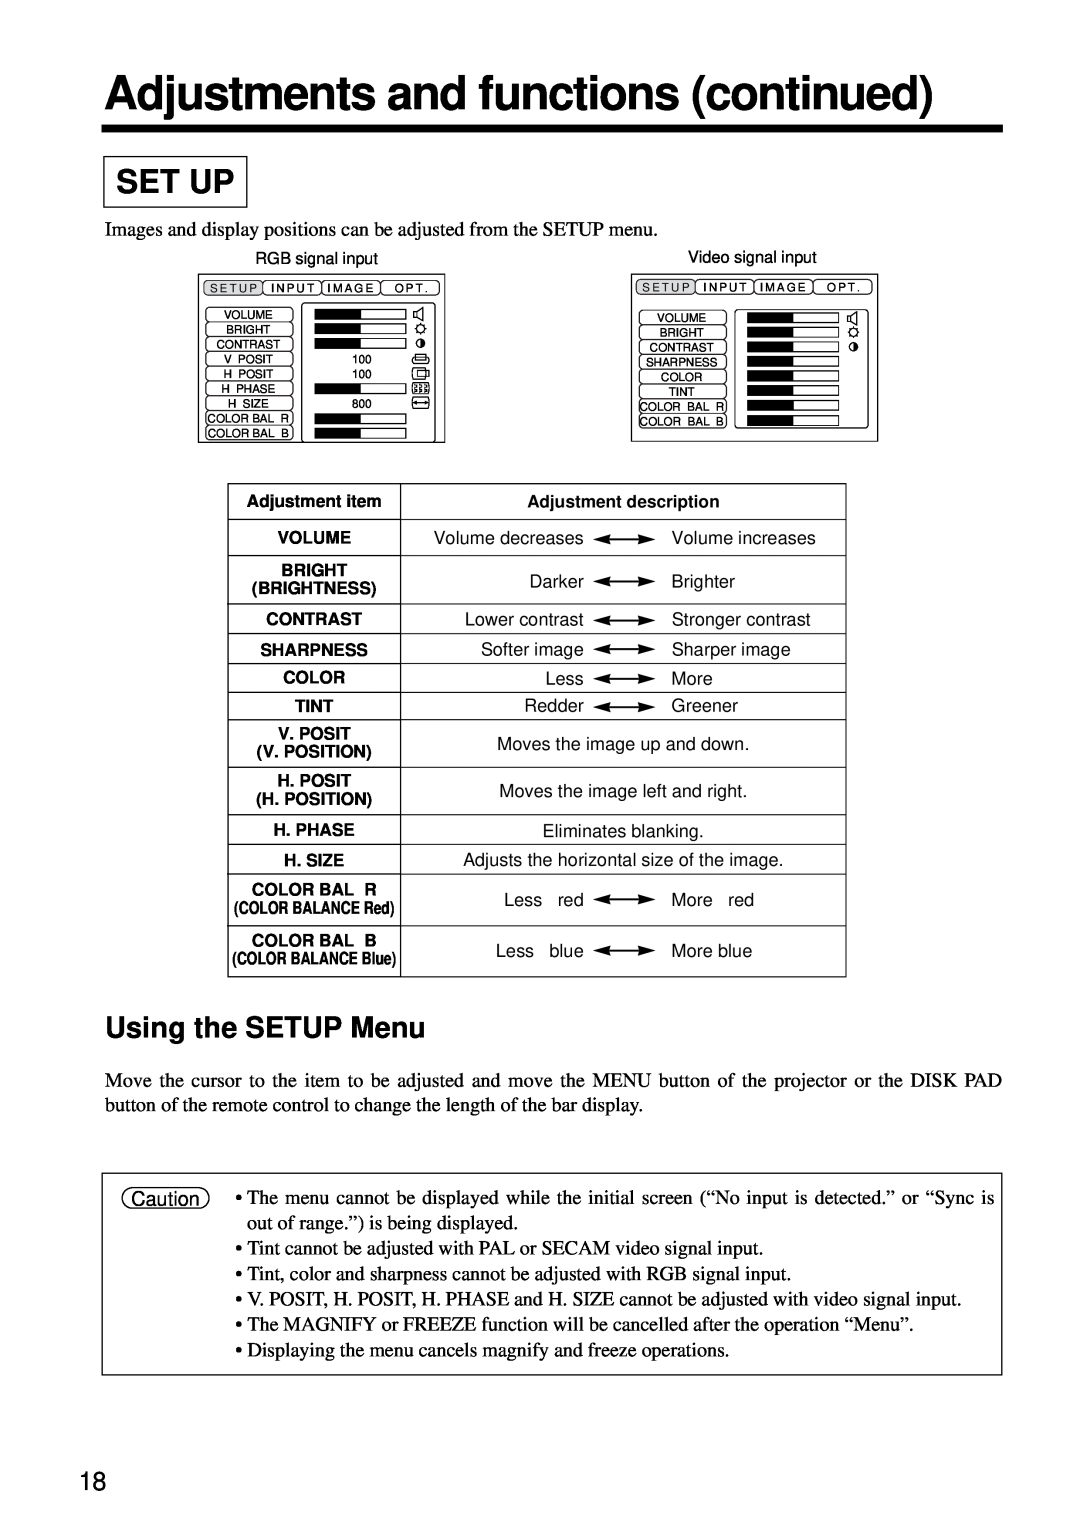 Hitachi CP-X960W user manual Adjustments and functions continued, Set Up, Using the SETUP Menu 